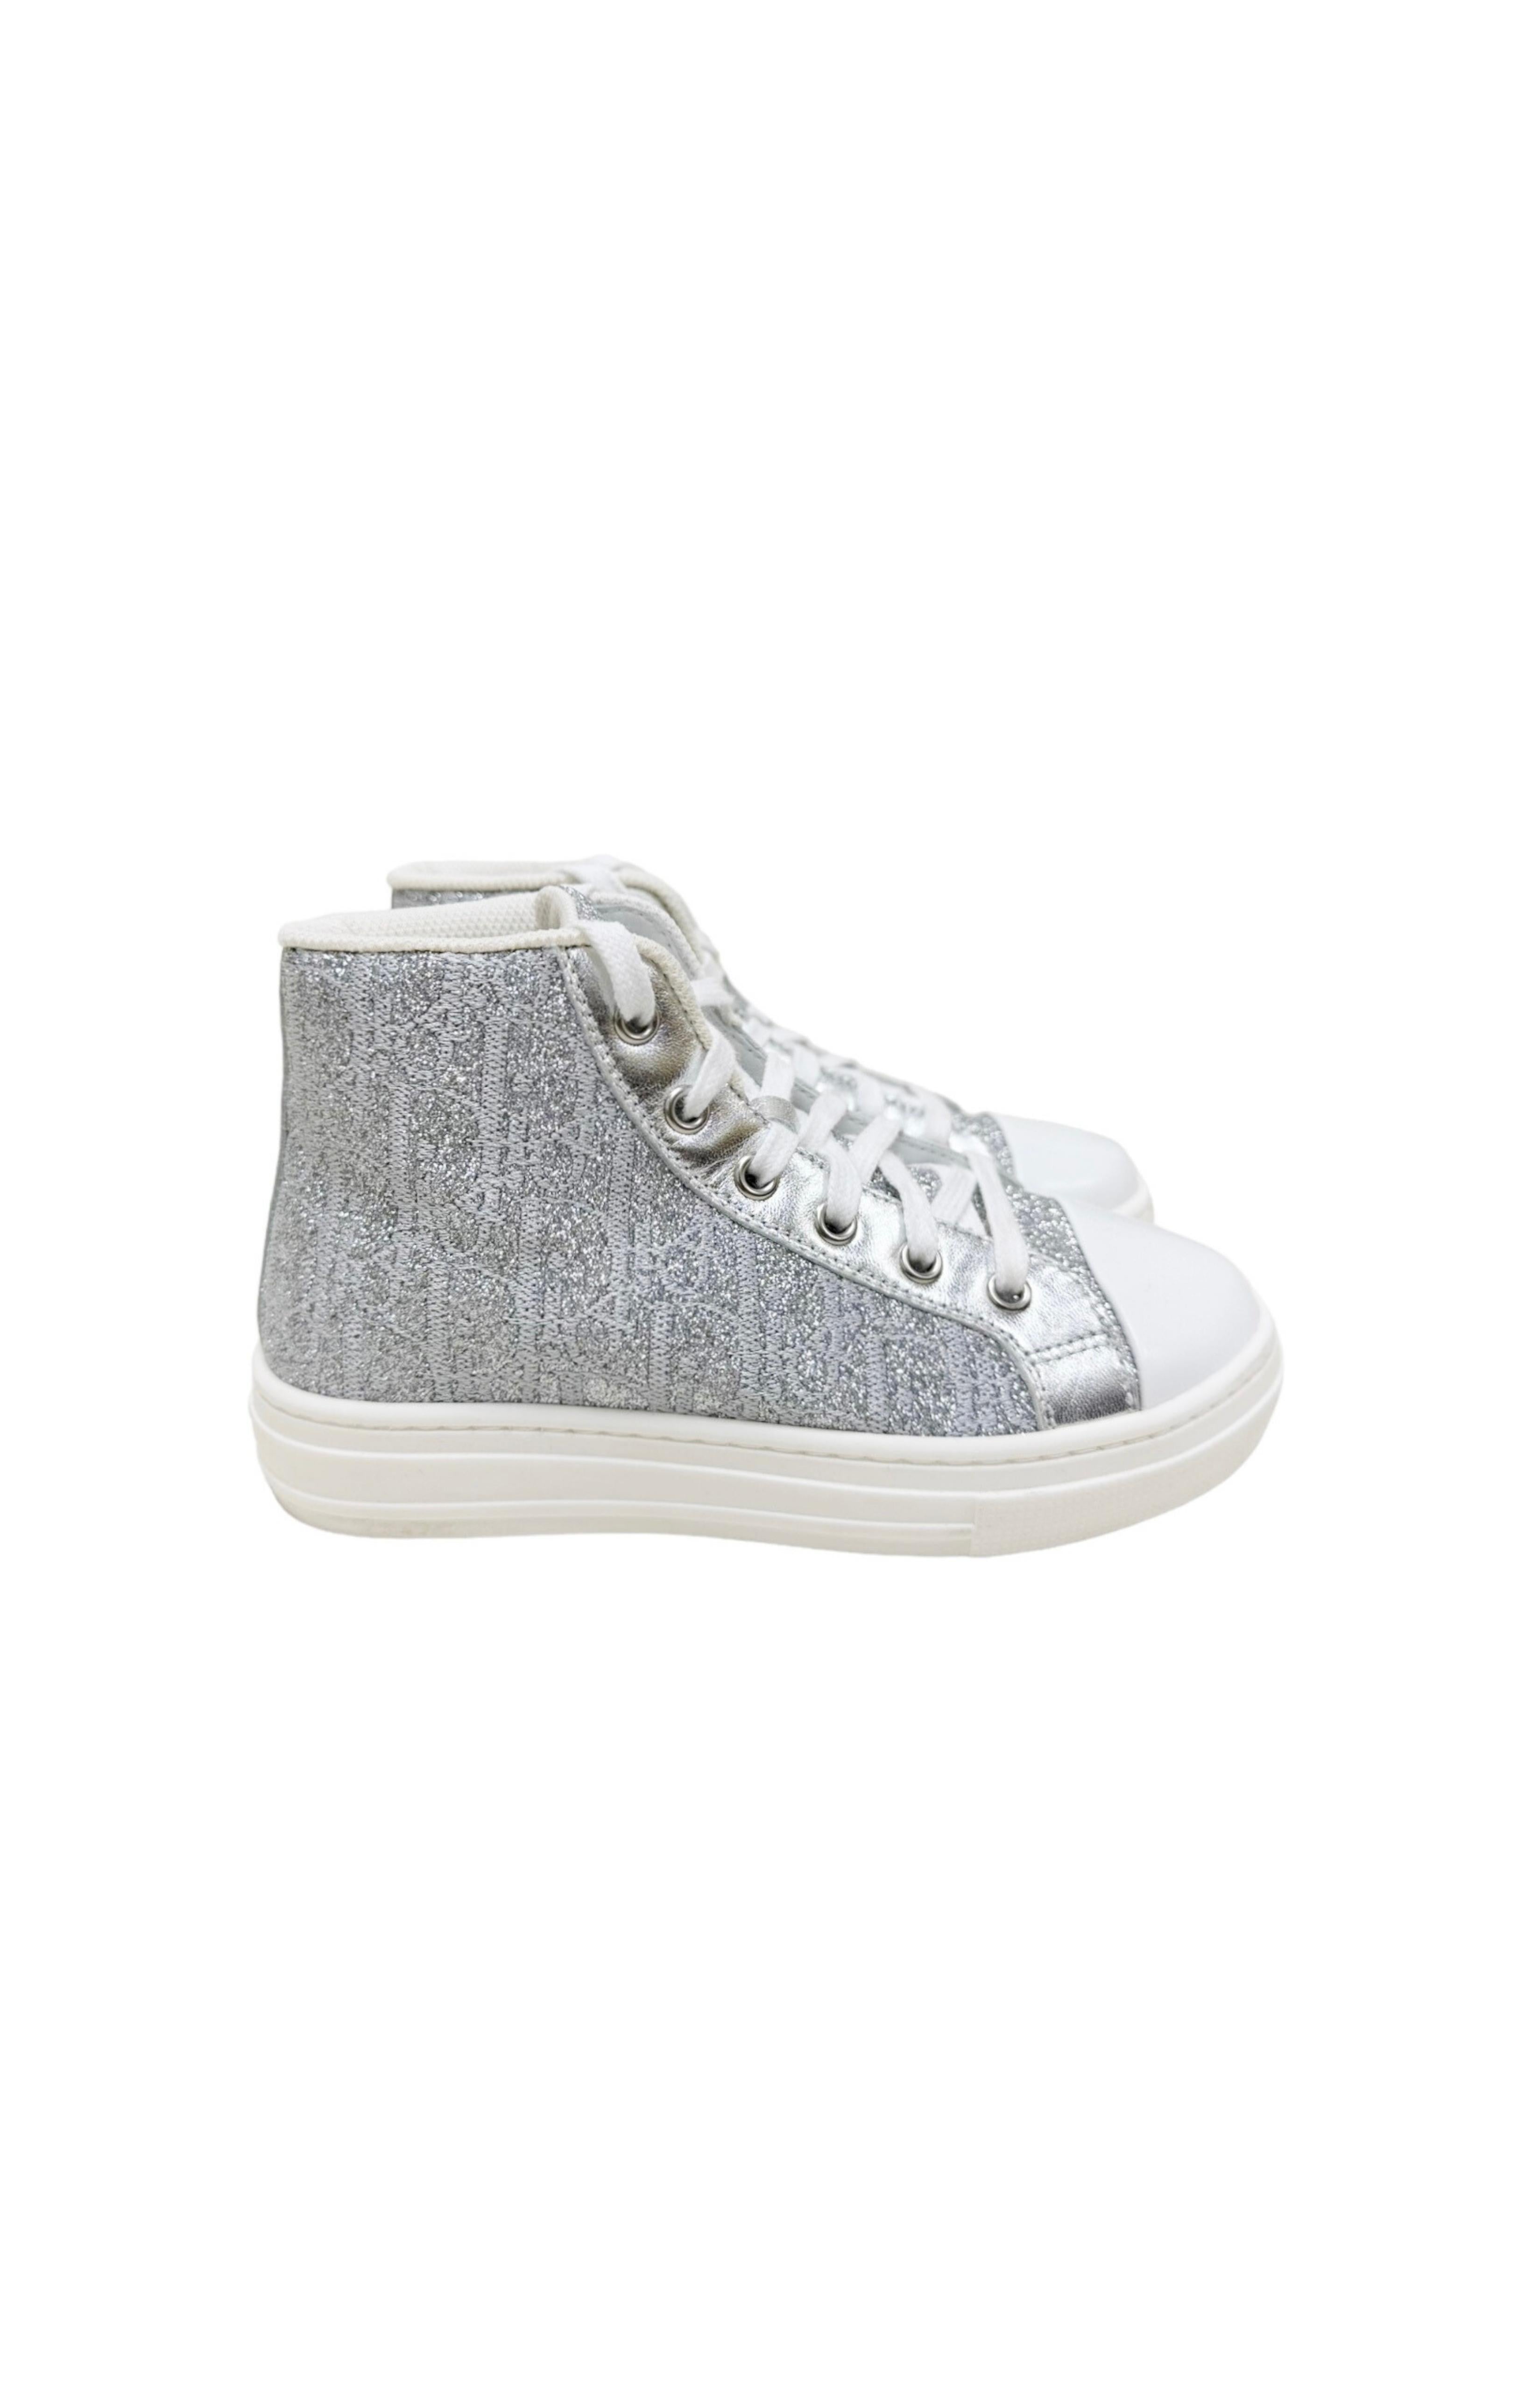 DIOR Sneakers Size: EUR 27 / Toddler US 11.5